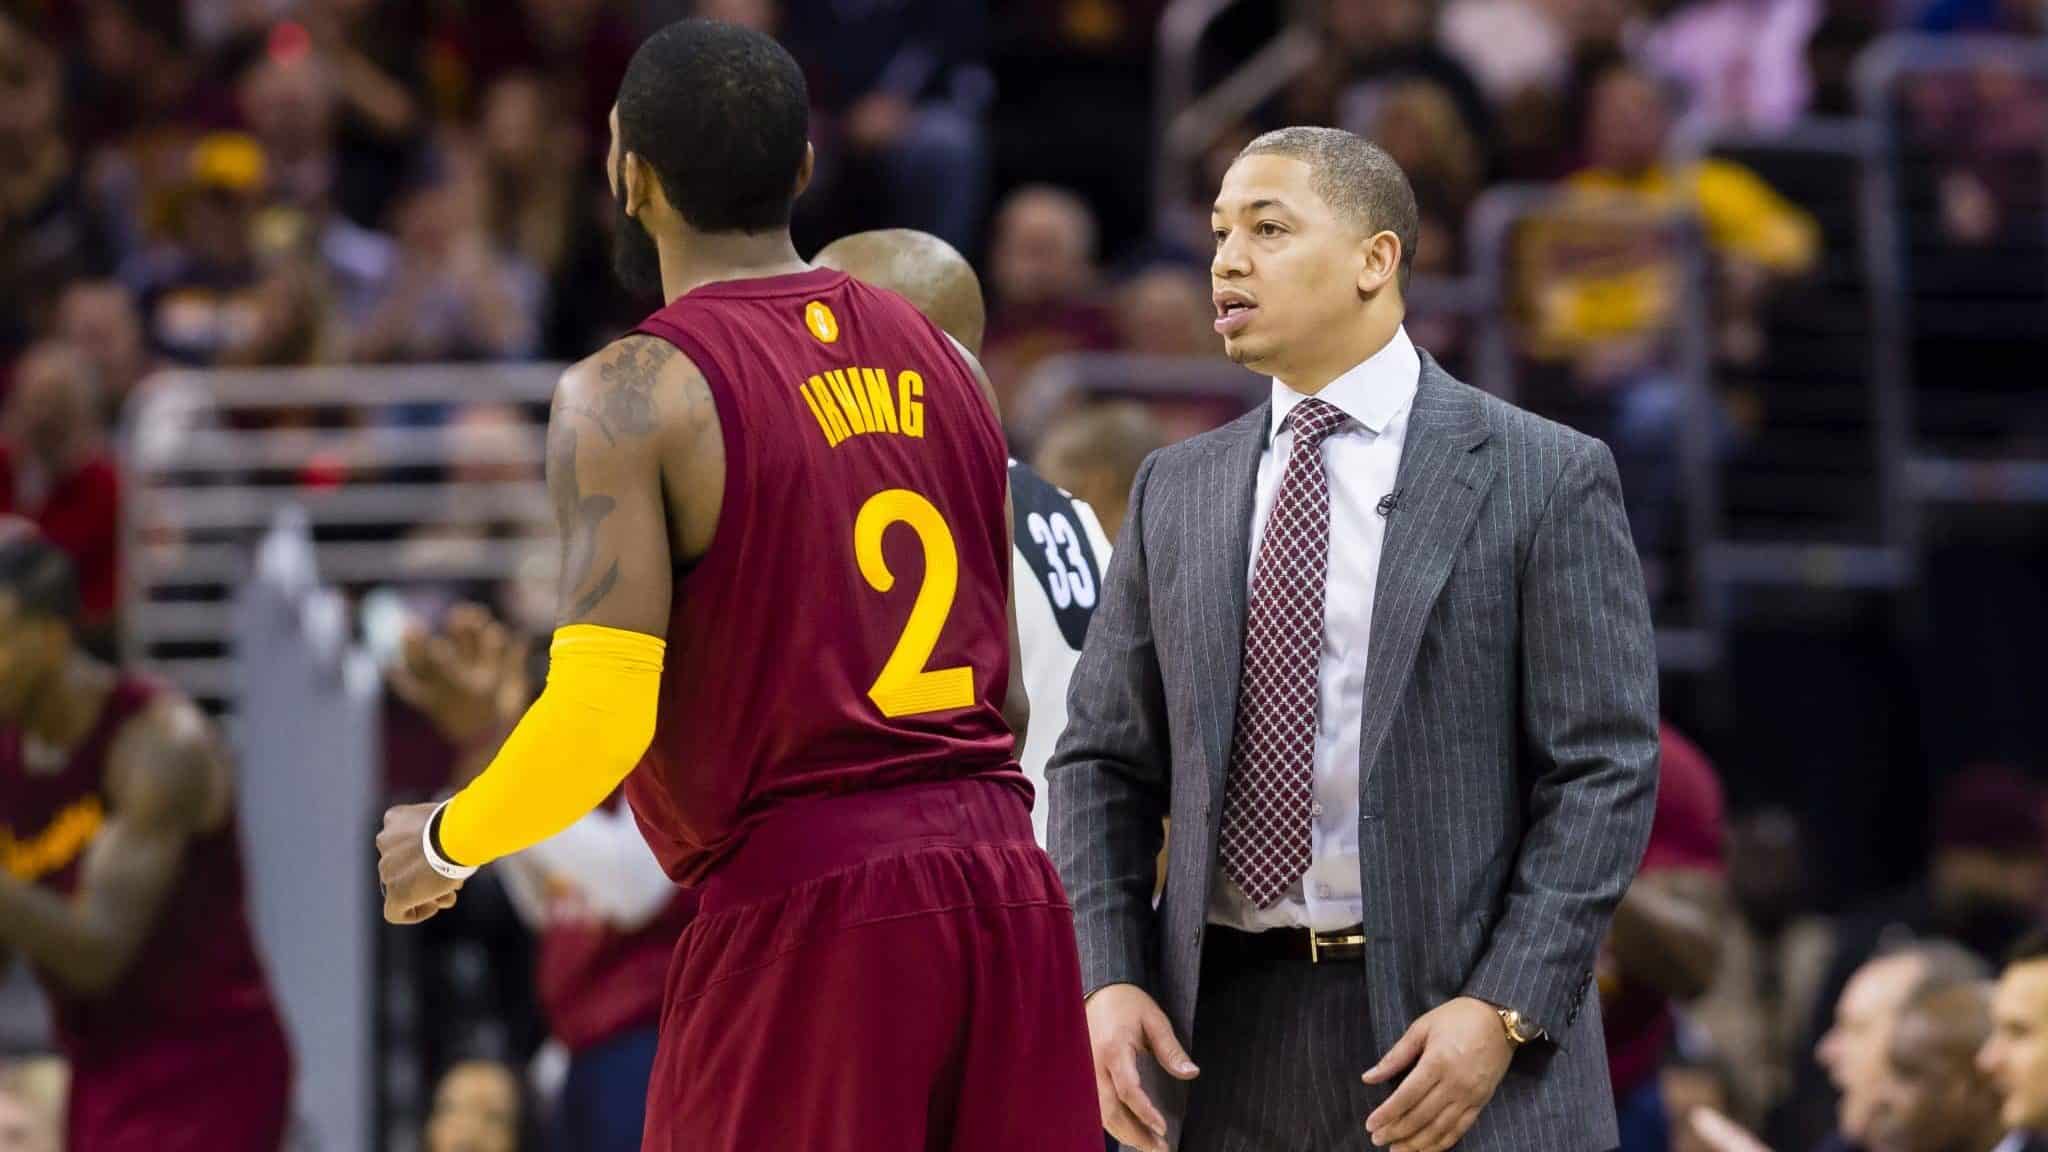 CLEVELAND, OH - DECEMBER 25: Kyrie Irving #2 of the Cleveland Cavaliers talks to head coach Tyronn Lue of the Cleveland Cavaliers during the first half against the Golden State Warriorsat Quicken Loans Arena on December 25, 2016 in Cleveland, Ohio. NOTE TO USER: User expressly acknowledges and agrees that, by downloading and/or using this photograph, user is consenting to the terms and conditions of the Getty Images License Agreement. Mandatory copyright notice.